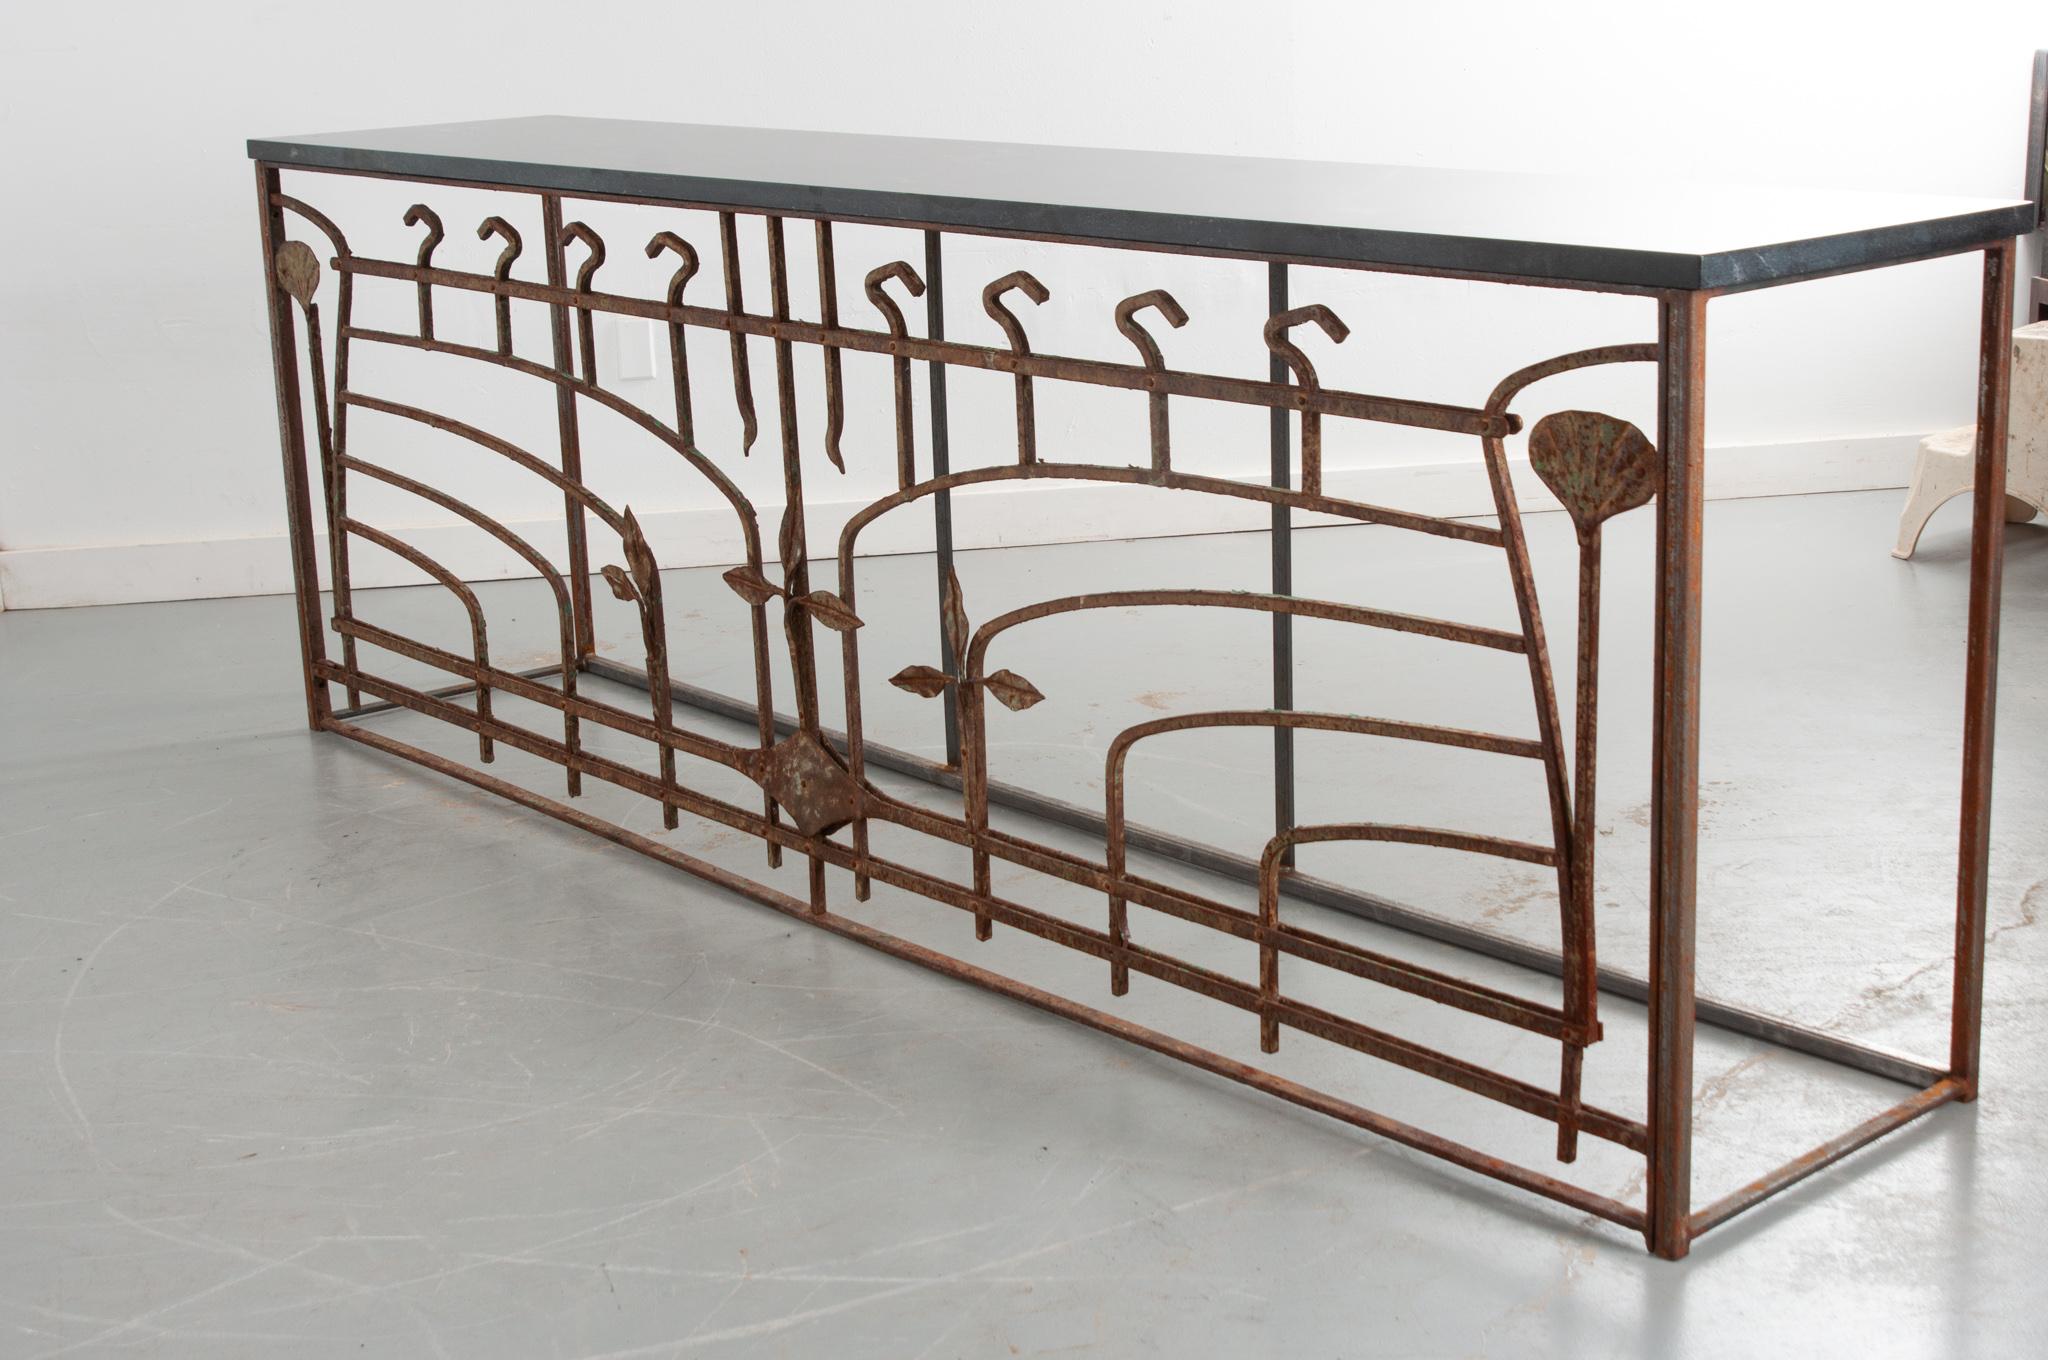 Grand French Art Nouveau Iron & Stone Console For Sale 8